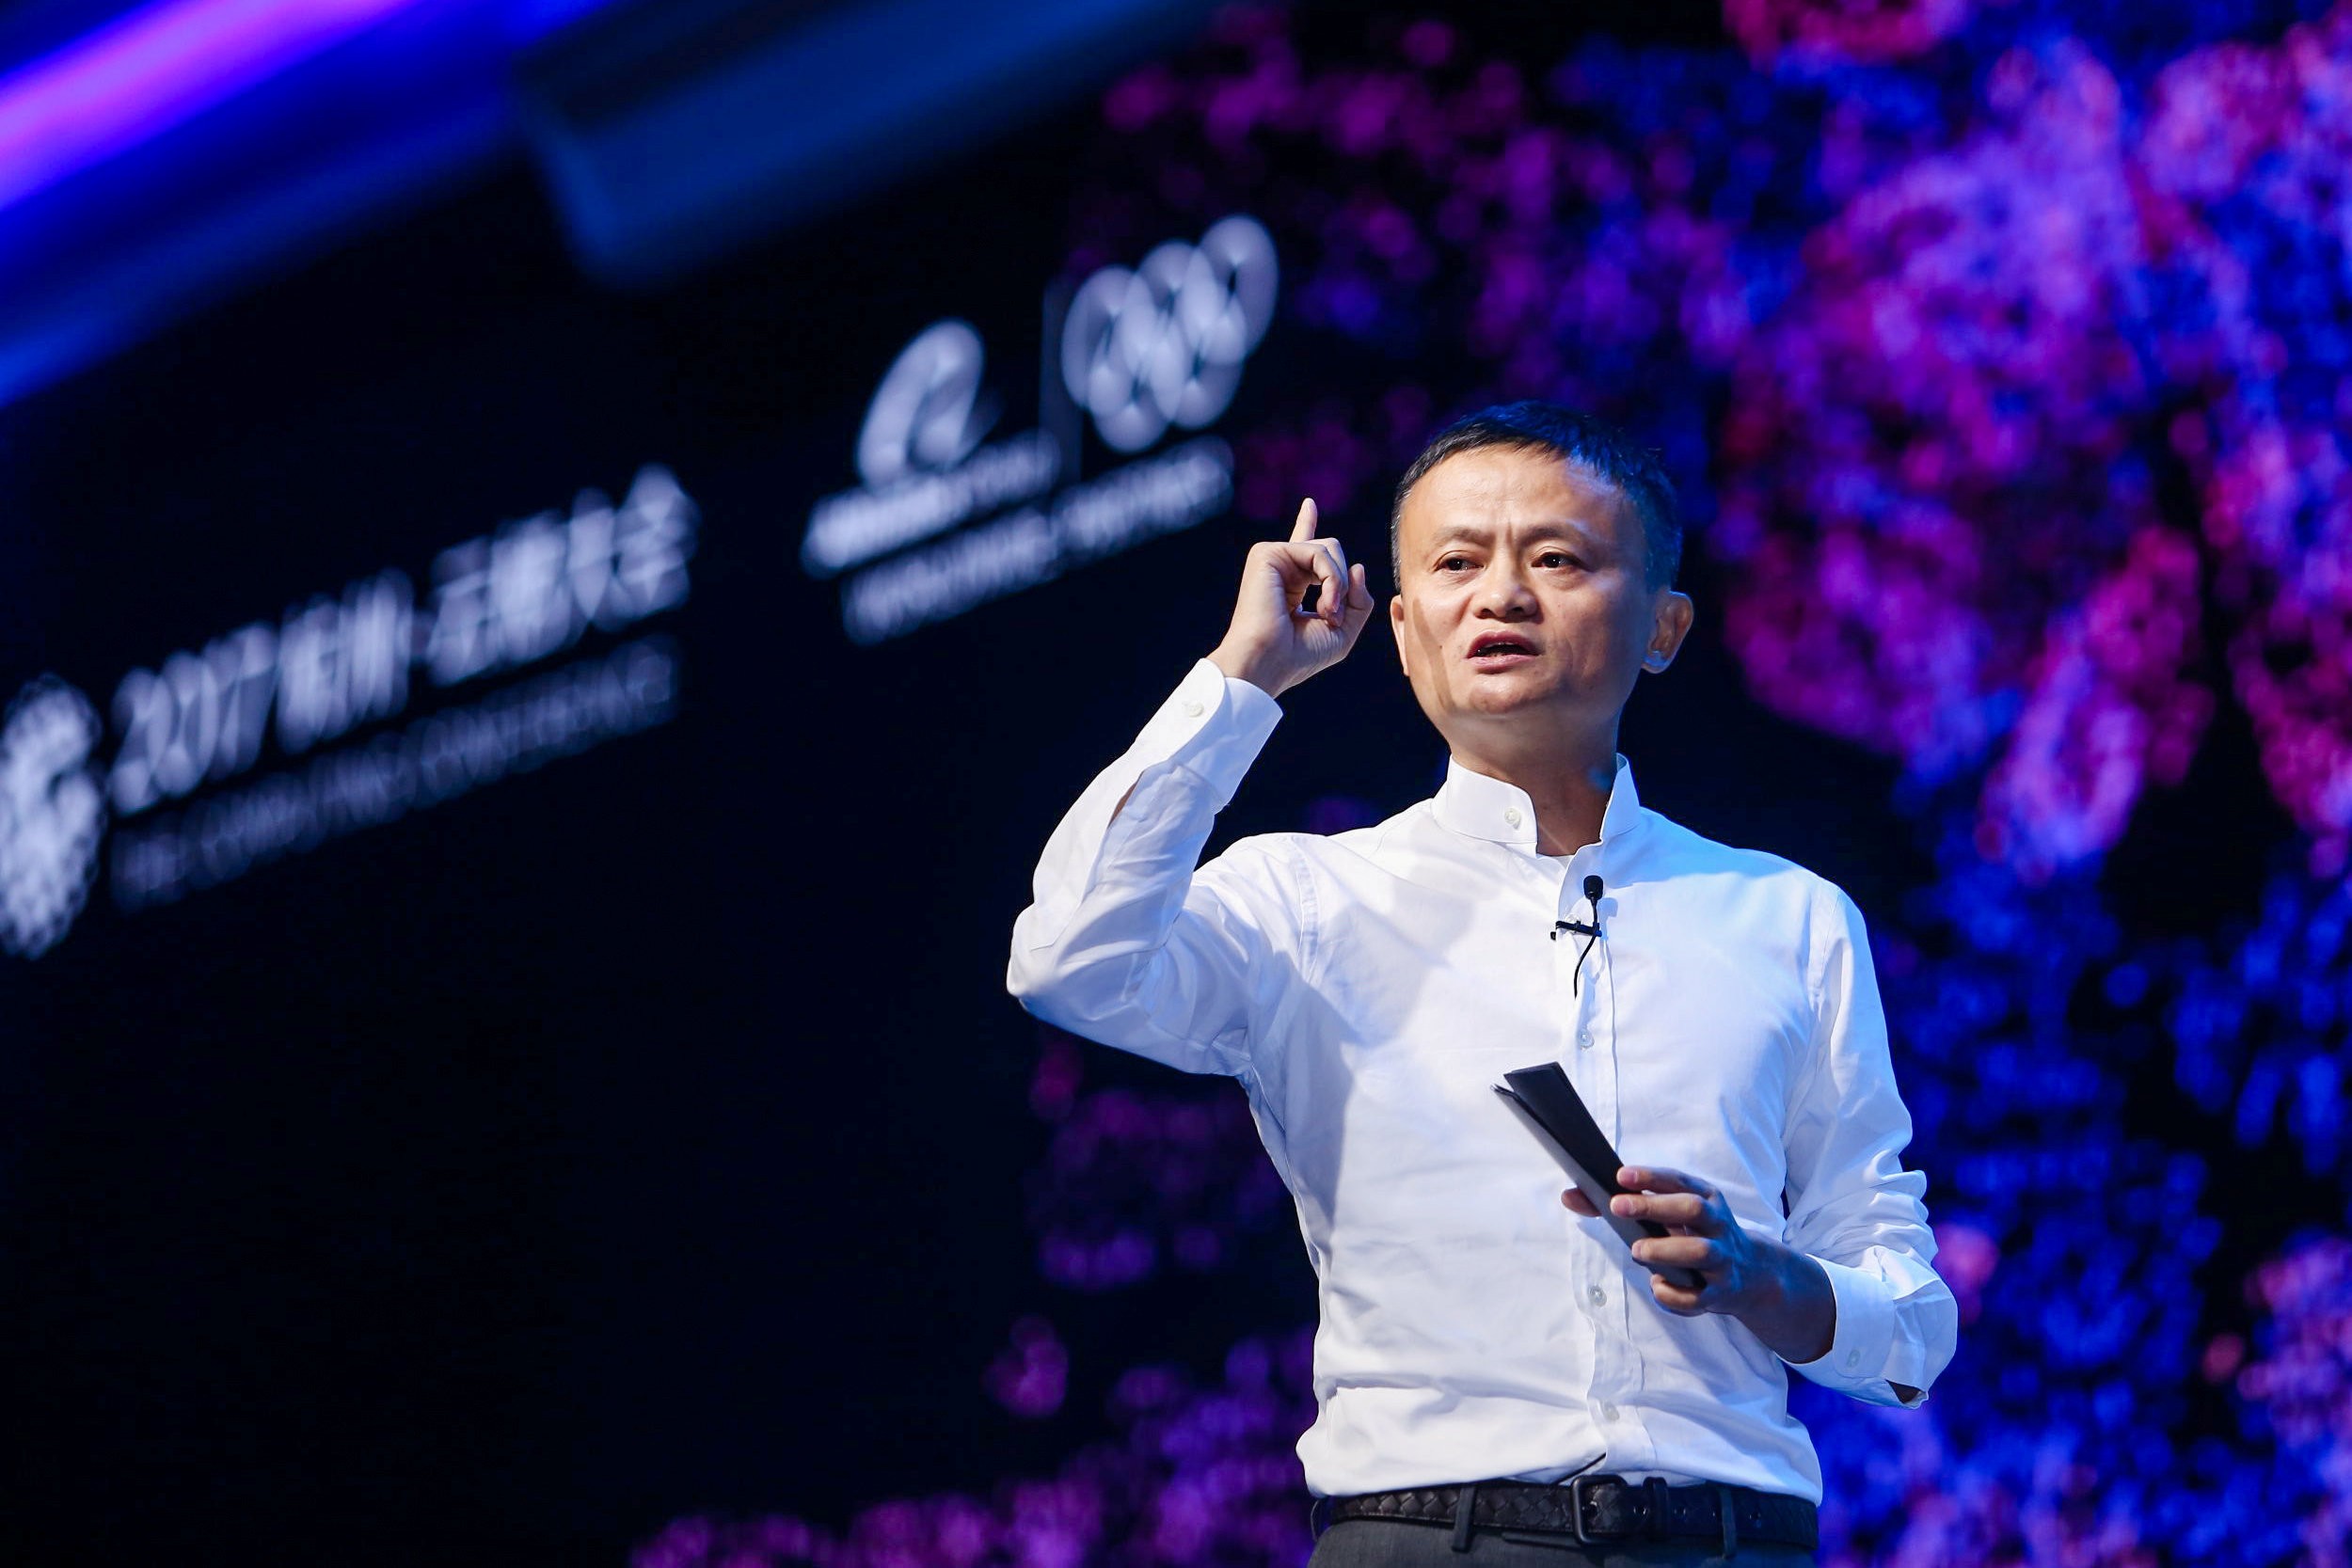 People are wise, so have confidence in yourselves and don’t worry about the robot revolution, urges the Alibaba founder